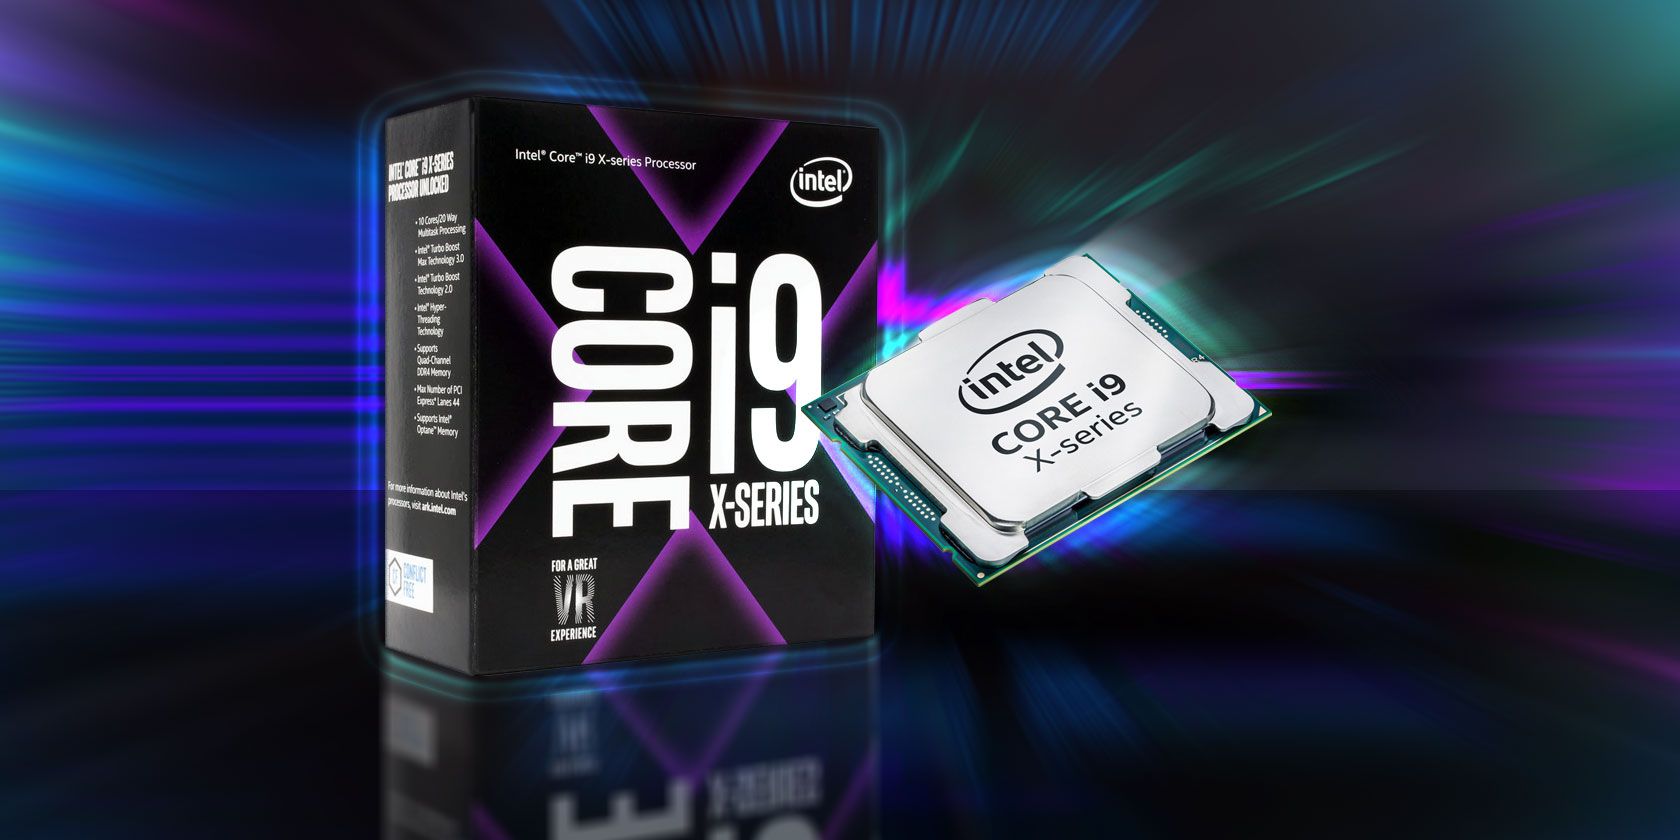 What Makes the Intel Core i9 the Fastest Processor and Should You Buy It?